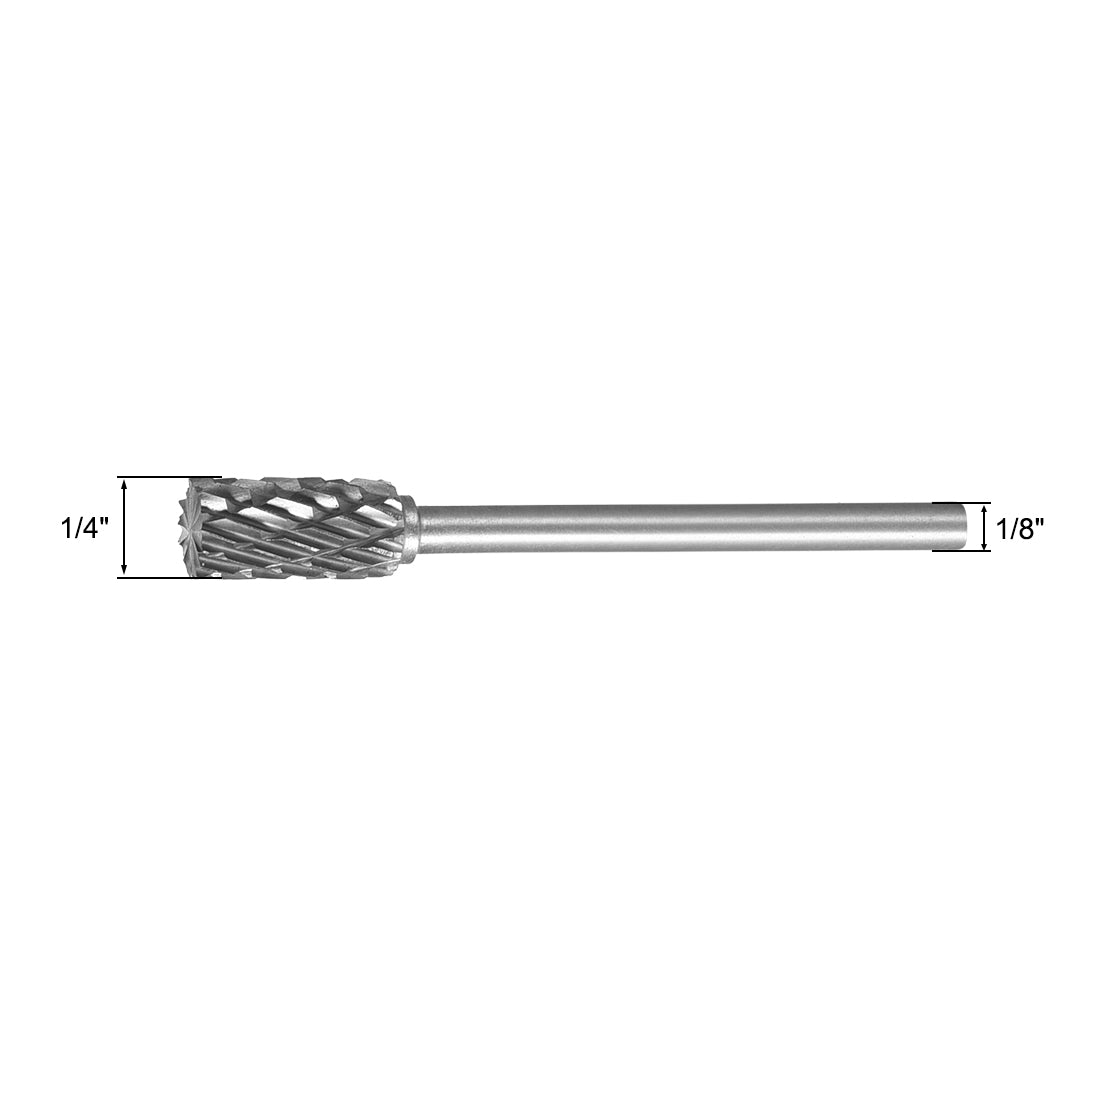 uxcell Uxcell Rotary Burrs File Double Cut Cylinder Shape w 1/8" Shank and 1/4" Head Size 2pcs